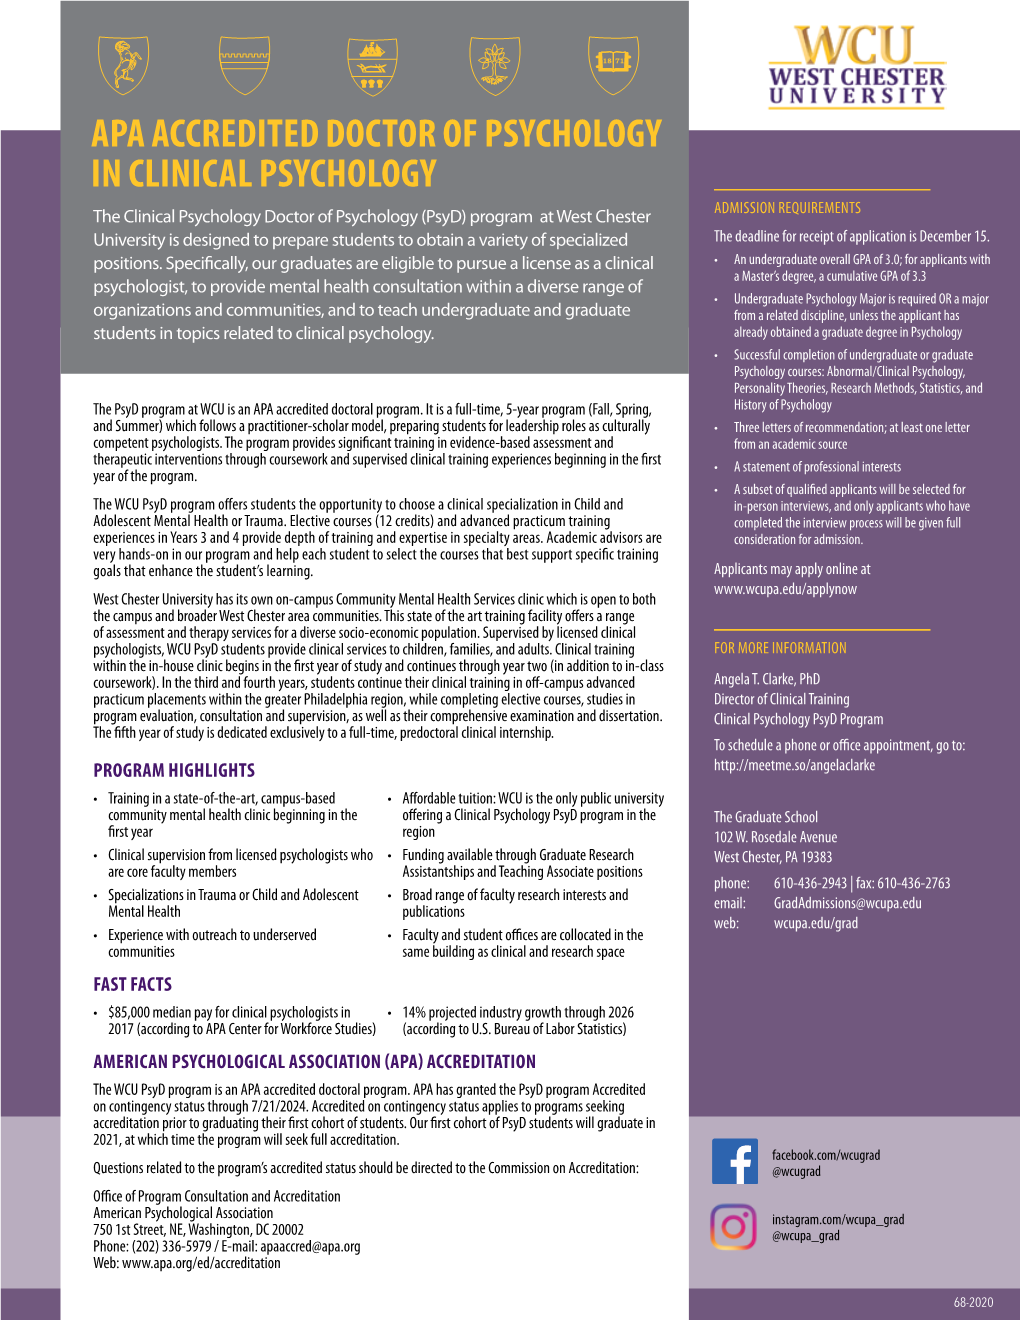 Apa Accredited Doctor of Psychology in Clinical